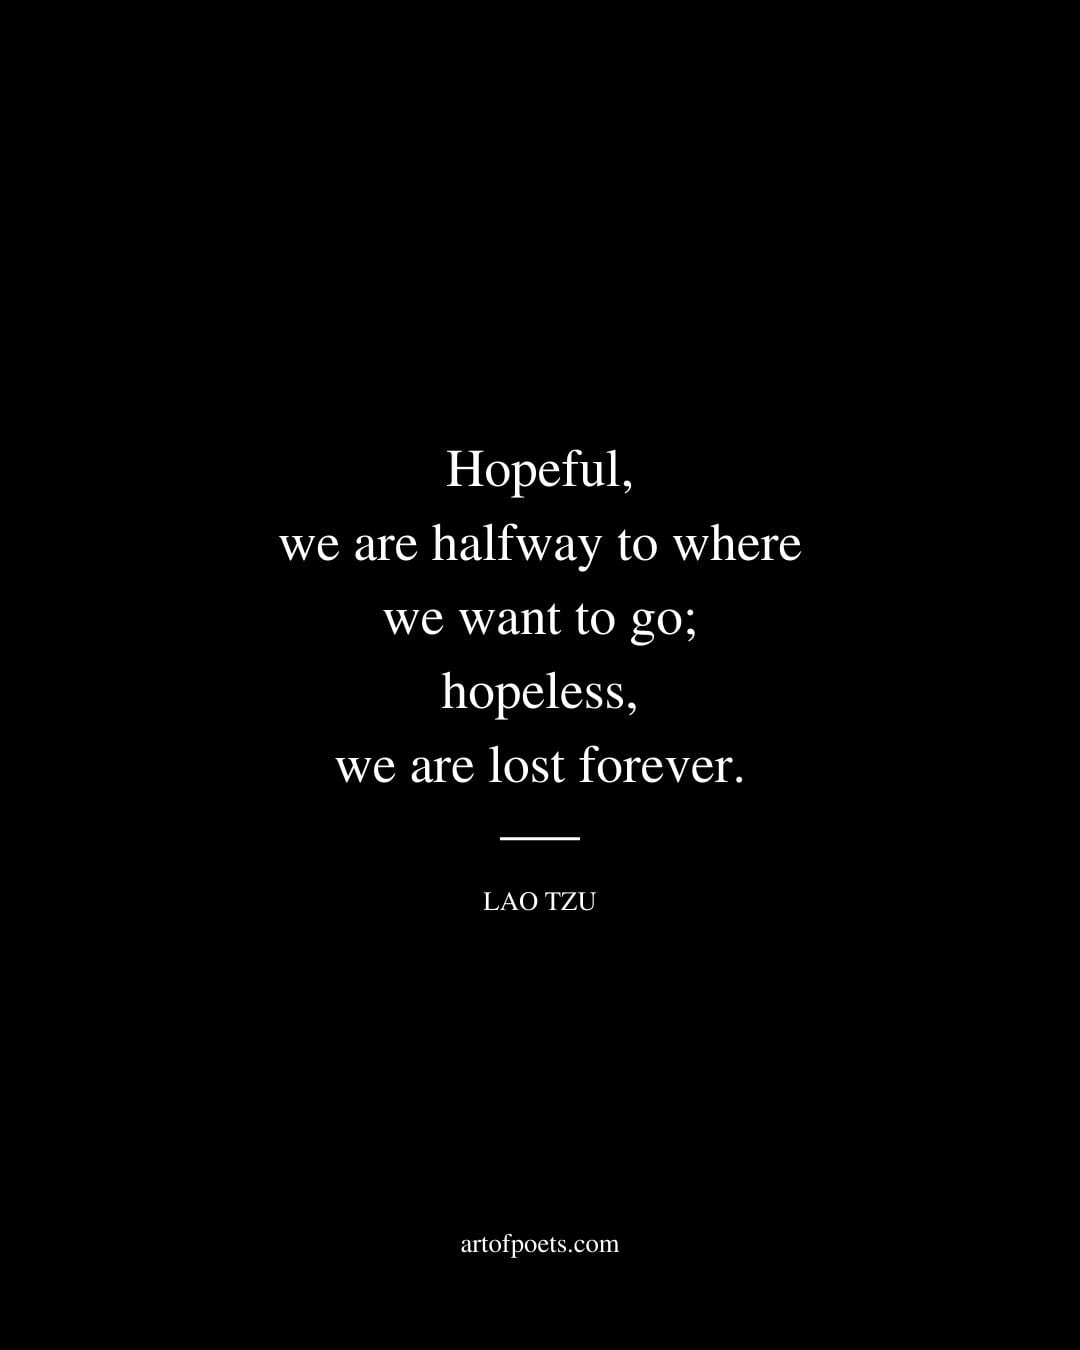 Hopeful we are halfway to where we want to go hopeless we are lost forever. Lao Tzu